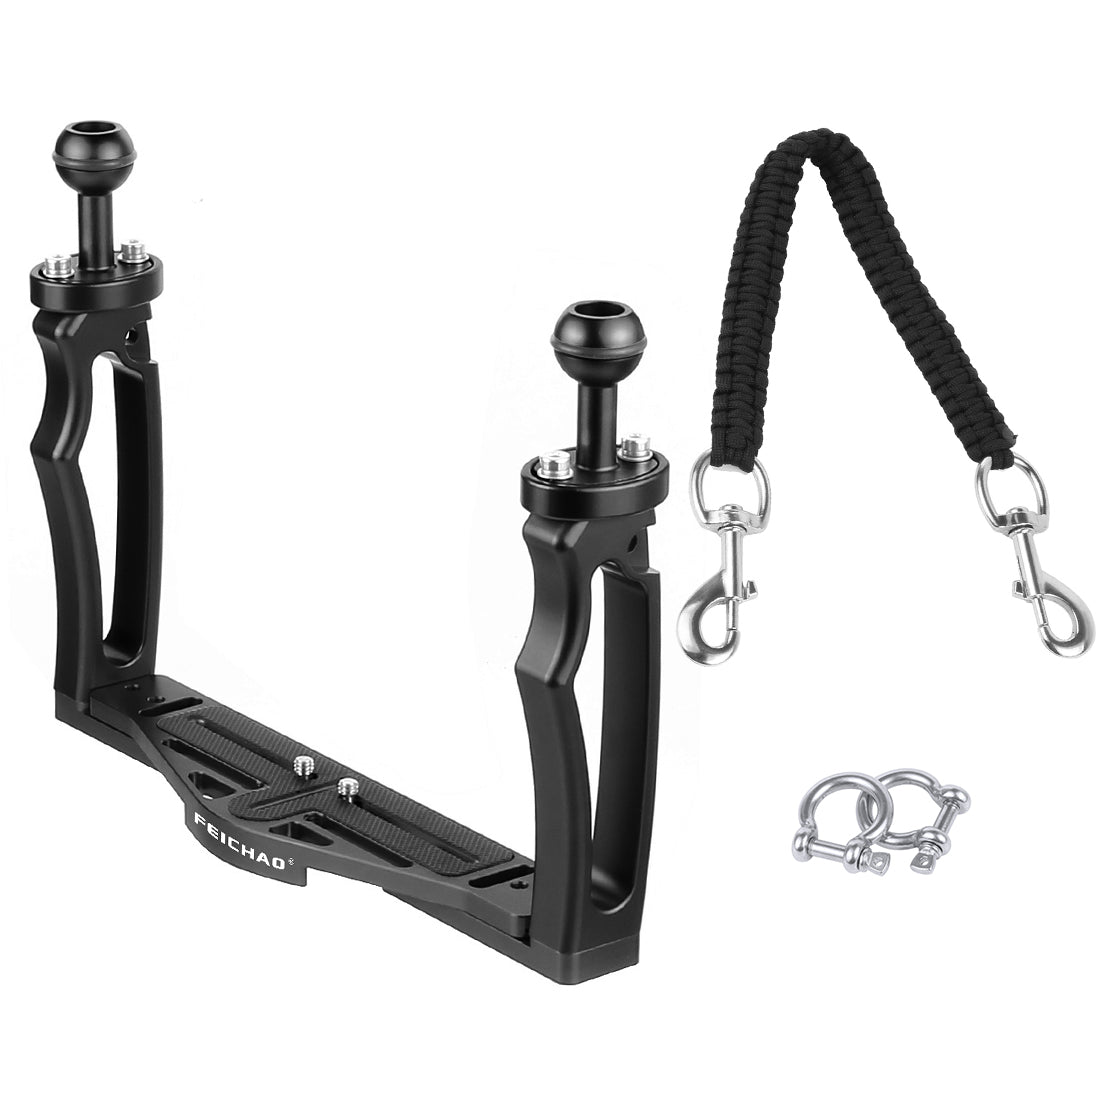 Feichao Adjustable Dual Handle Camera Rig For GoPro Canon Sony